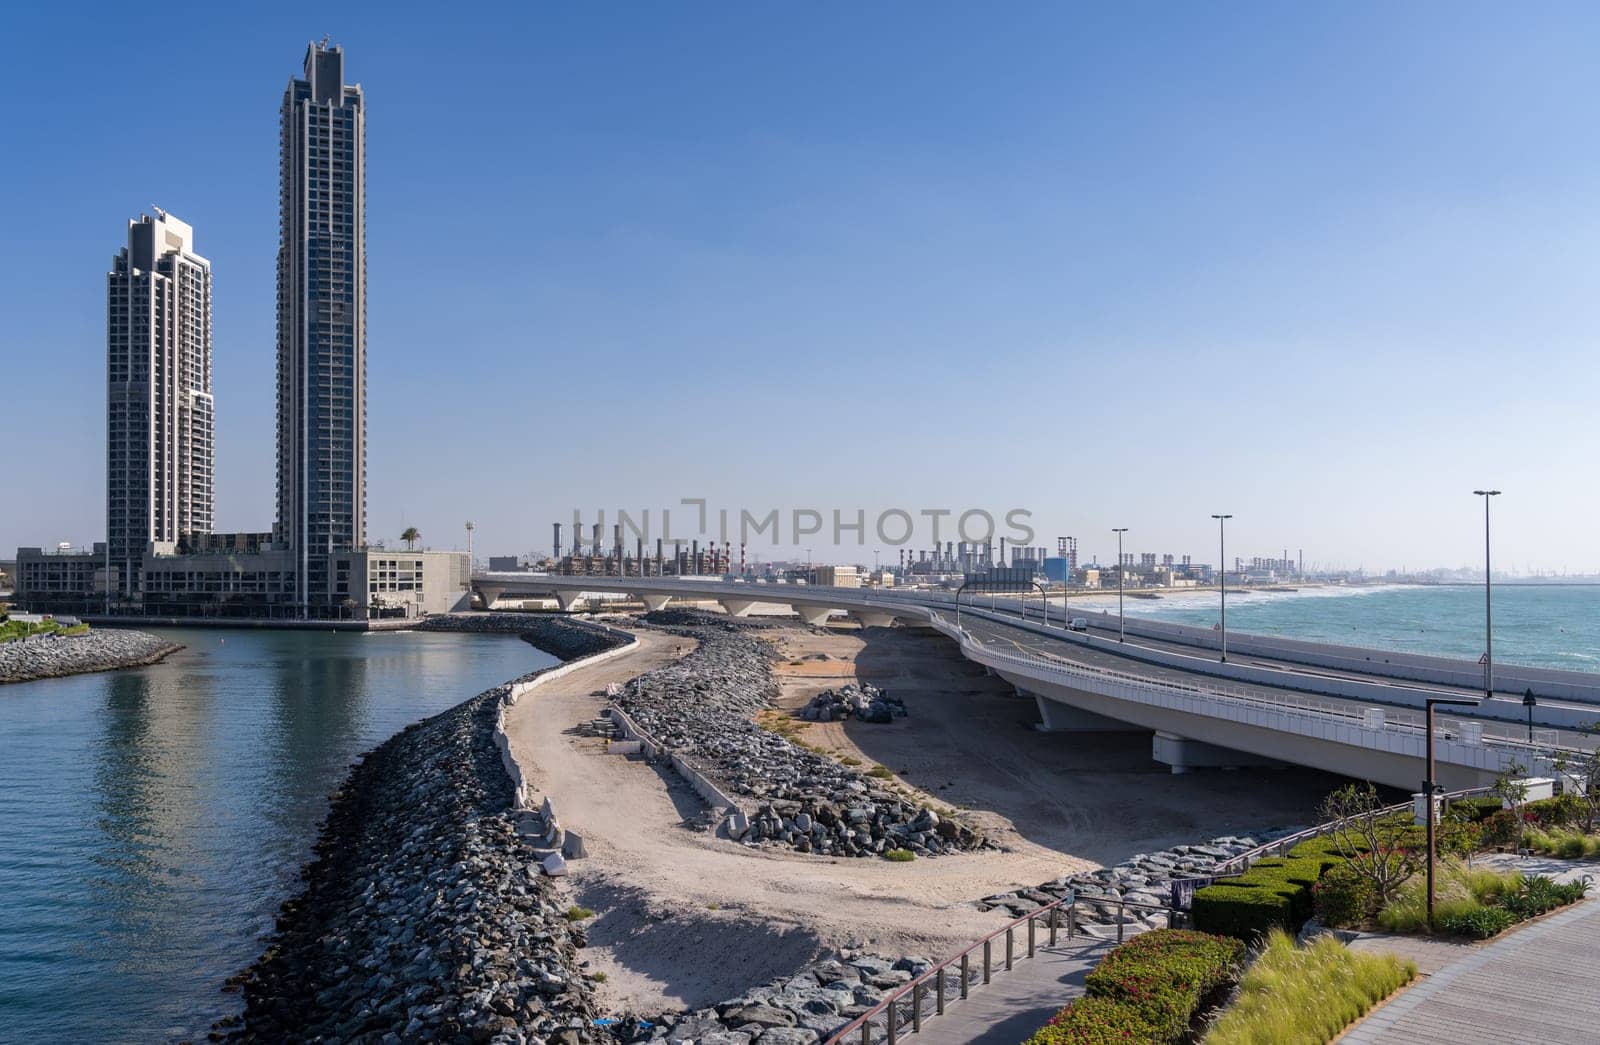 Power station and industrial area of Dubai by JBR Beach by steheap